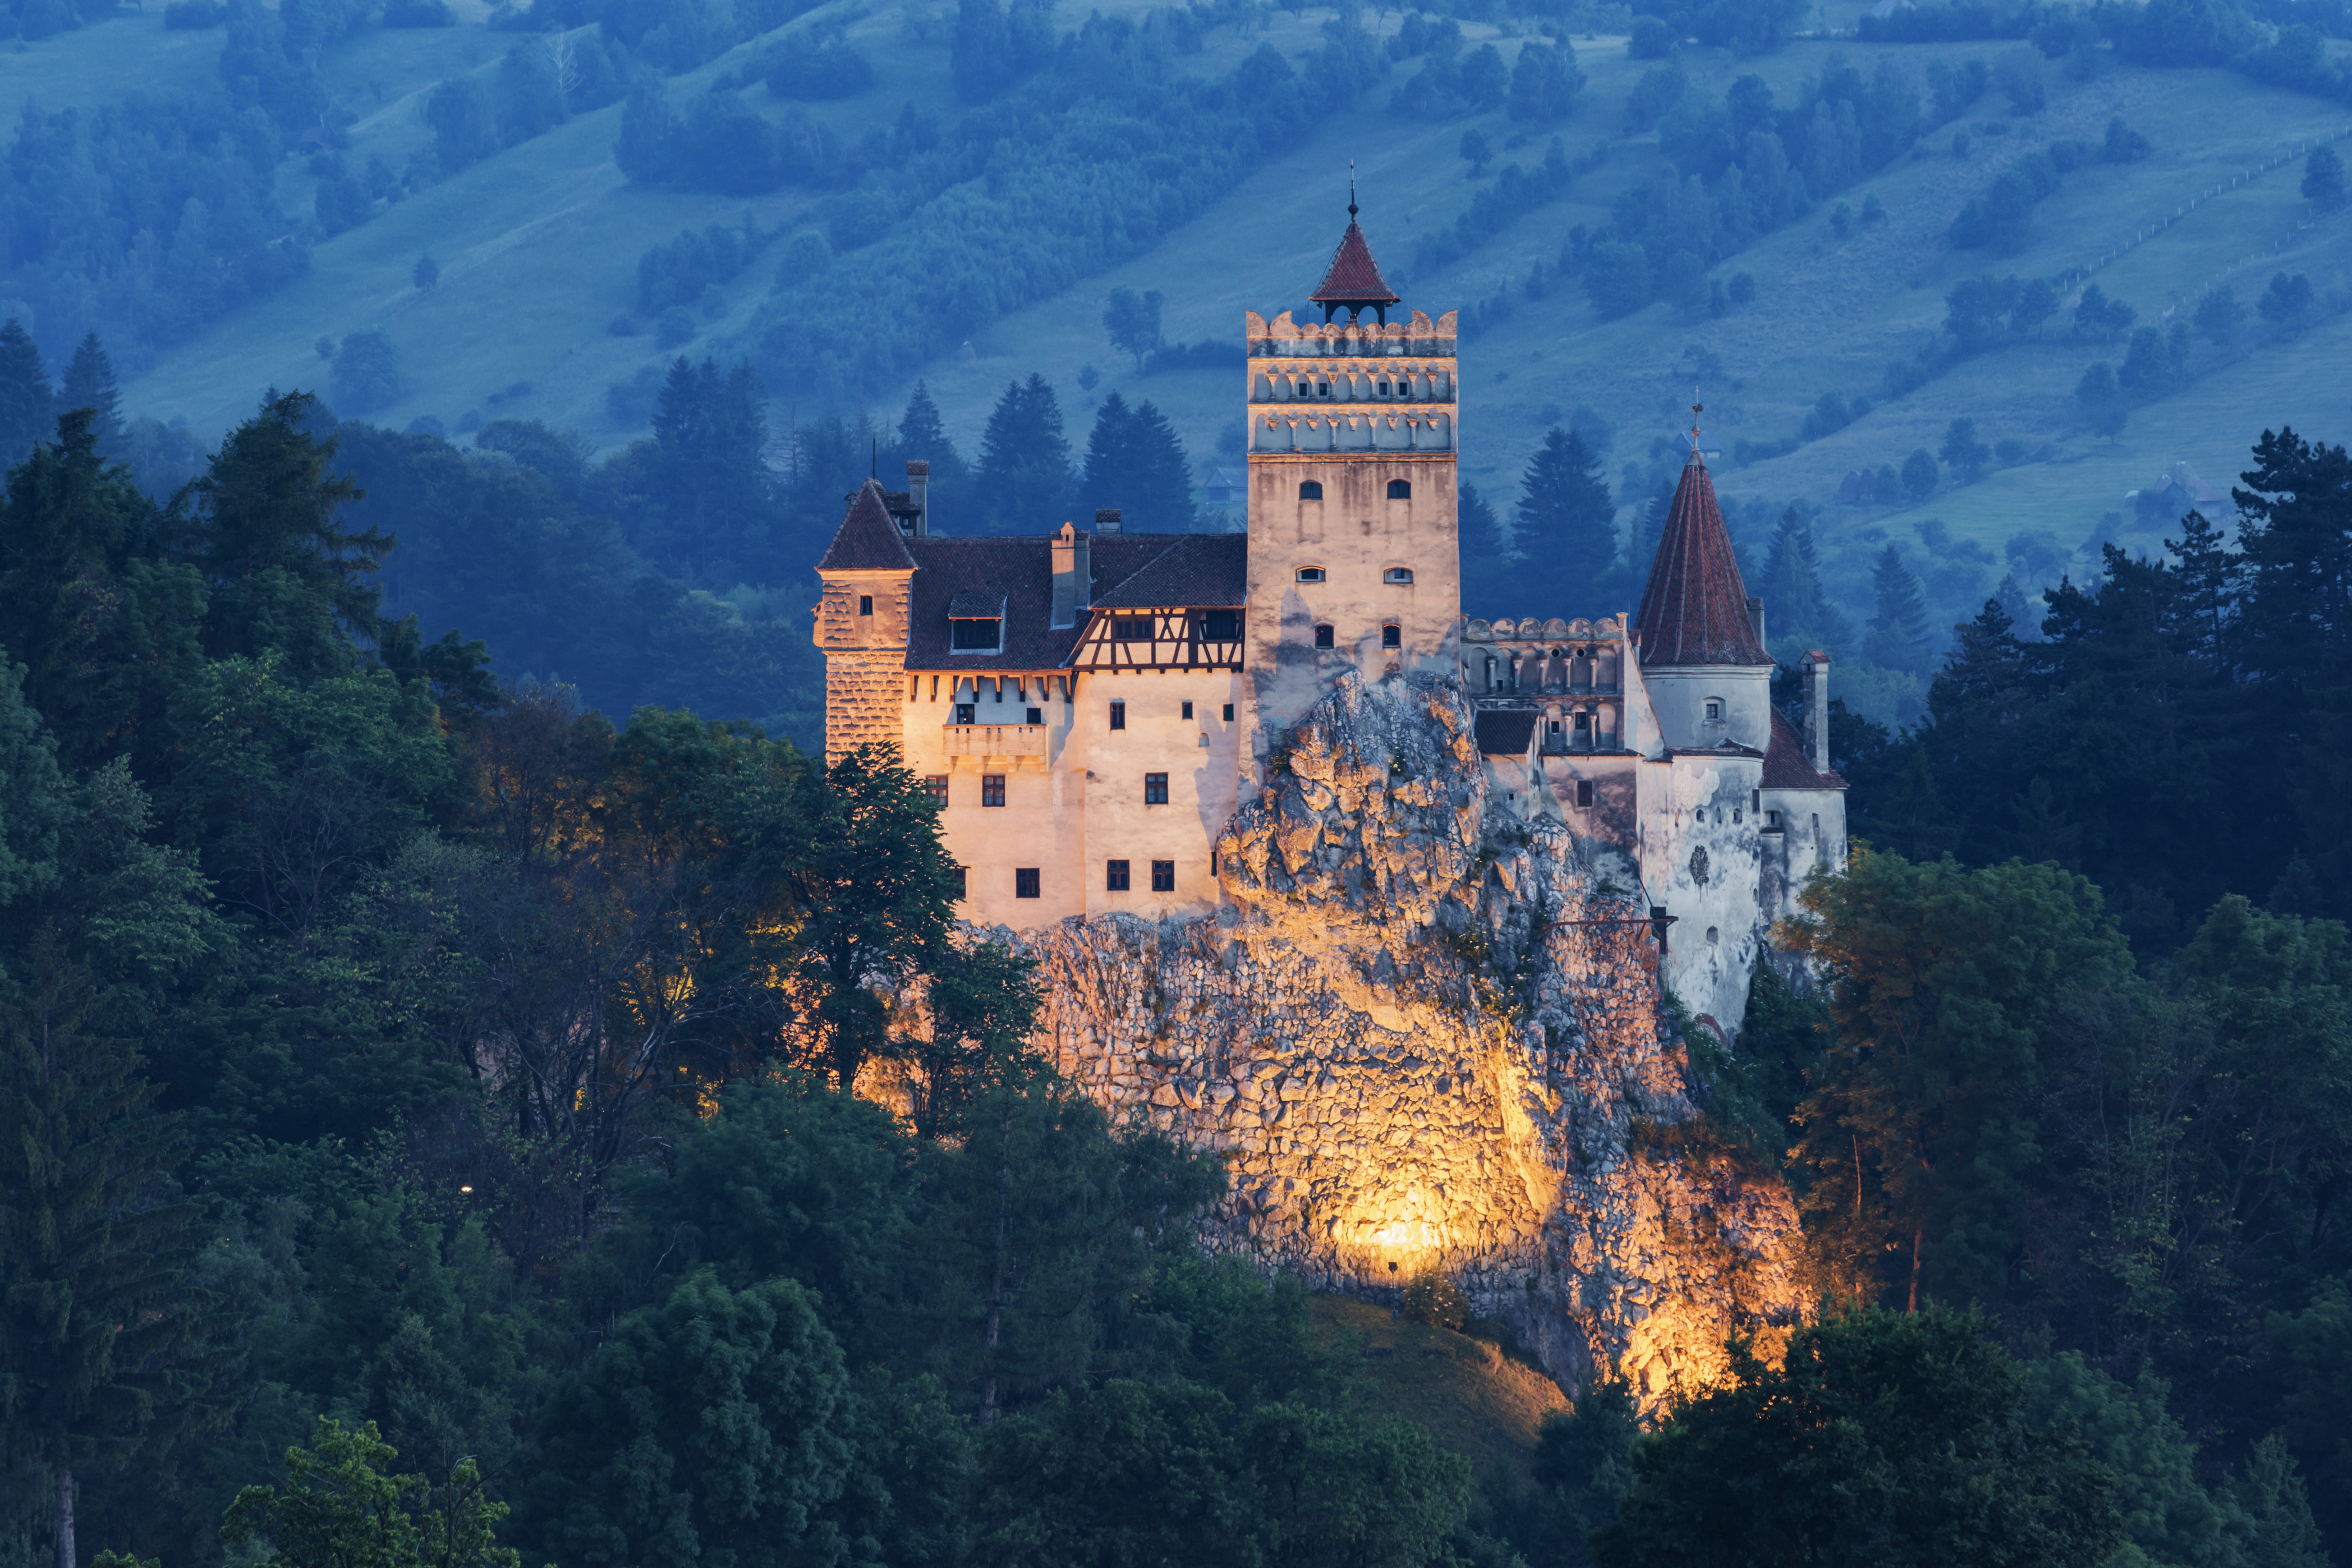 Castle on the Hill in Transylvania. Image: Jeremy Woodhouse/Getty